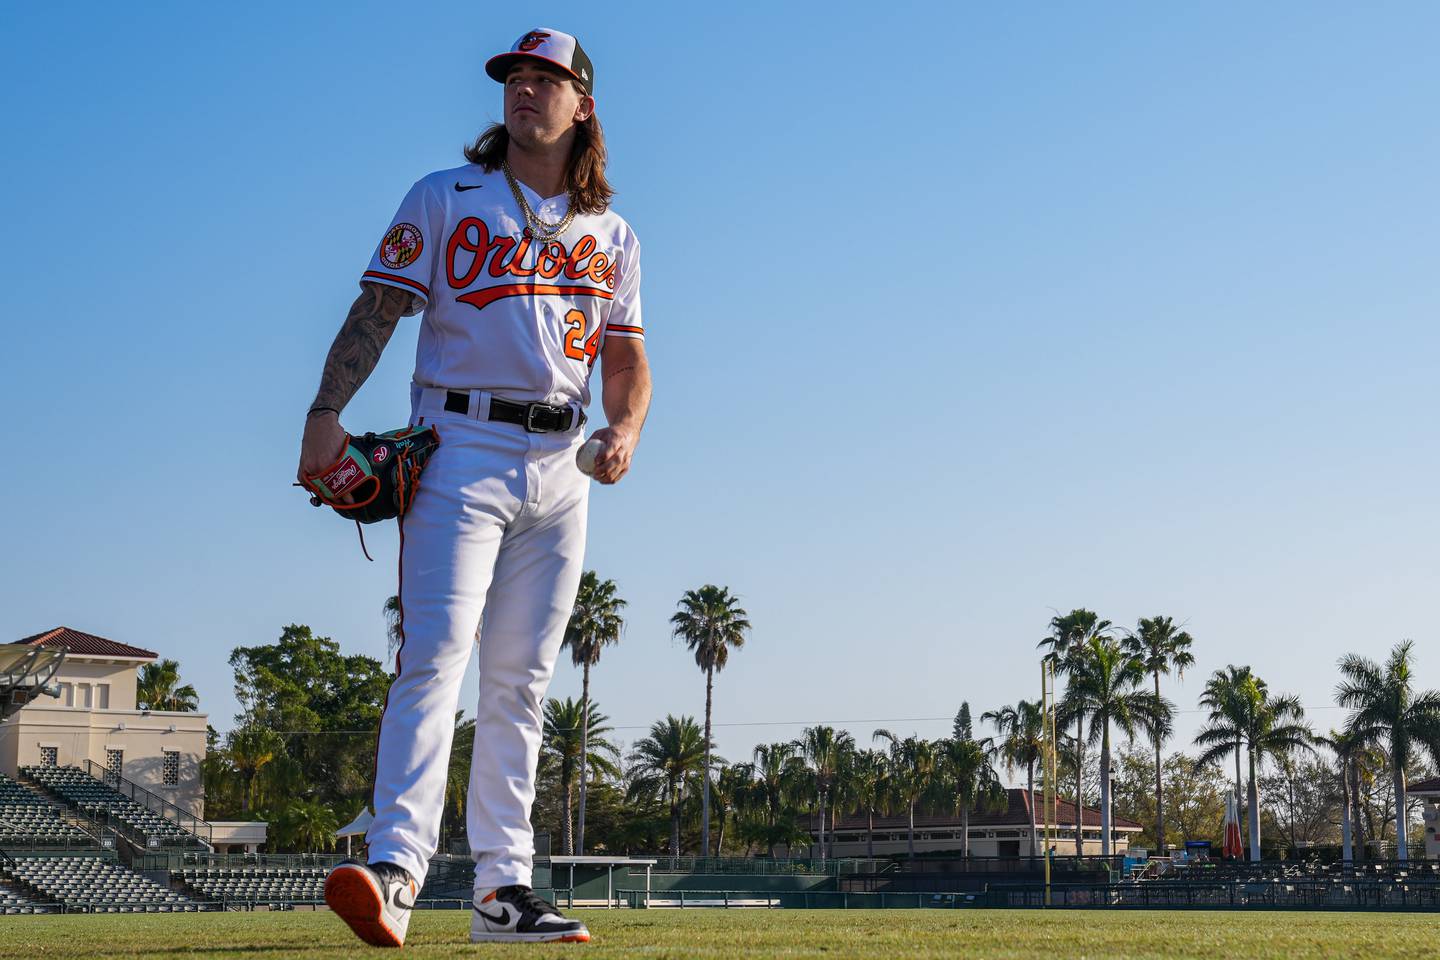 DL Hall (24) walks around the main field as he waits for other teammates to arrive on Photo Day at Ed Smith Stadium in Sarasota on 2/23/23. The Baltimore Orioles’ Spring Training session runs from mid-February through the end of March.